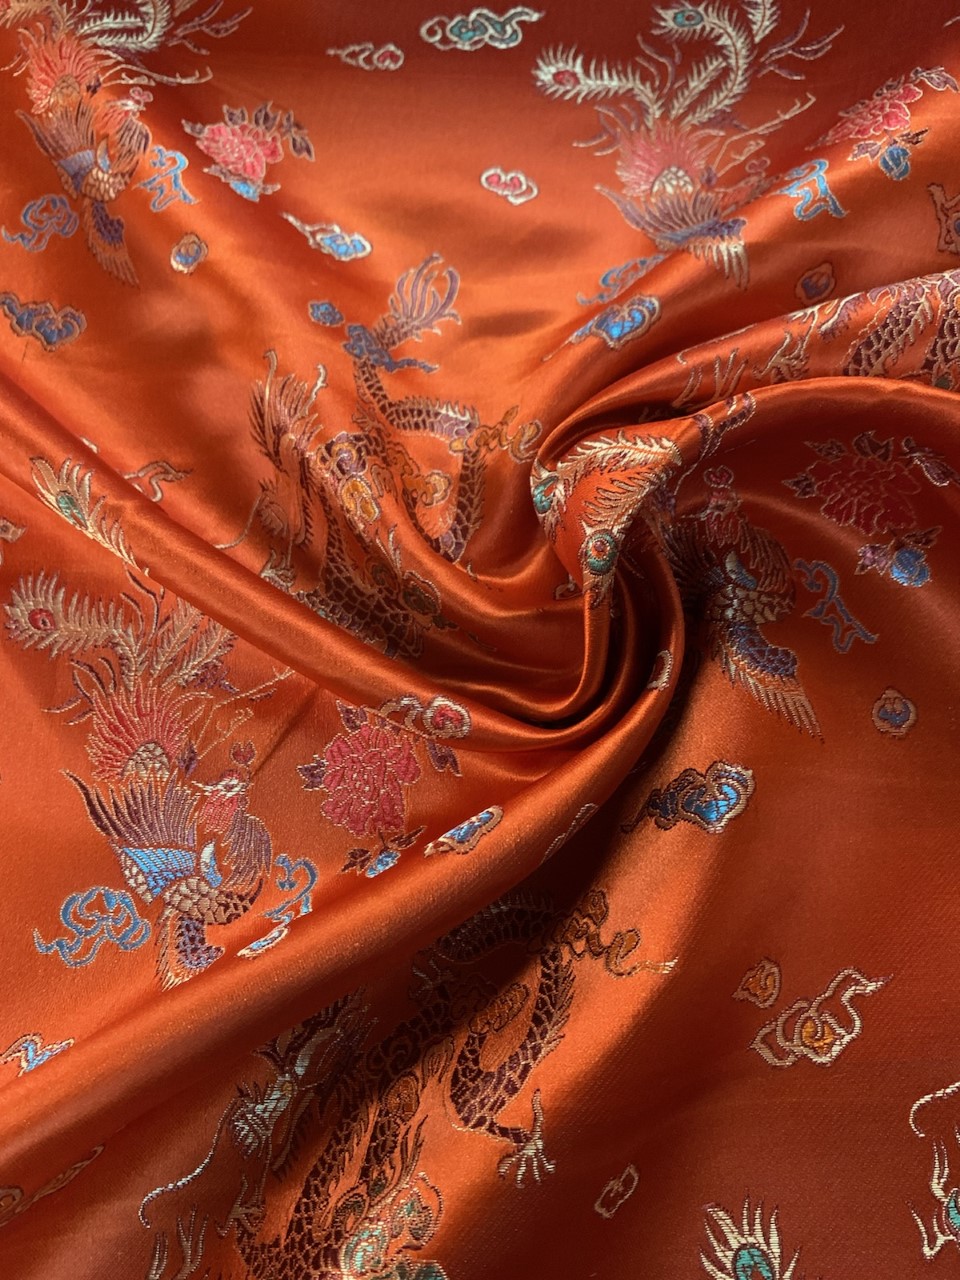 Orange Duck Cloth - 60" By The Yard - Click Image to Close